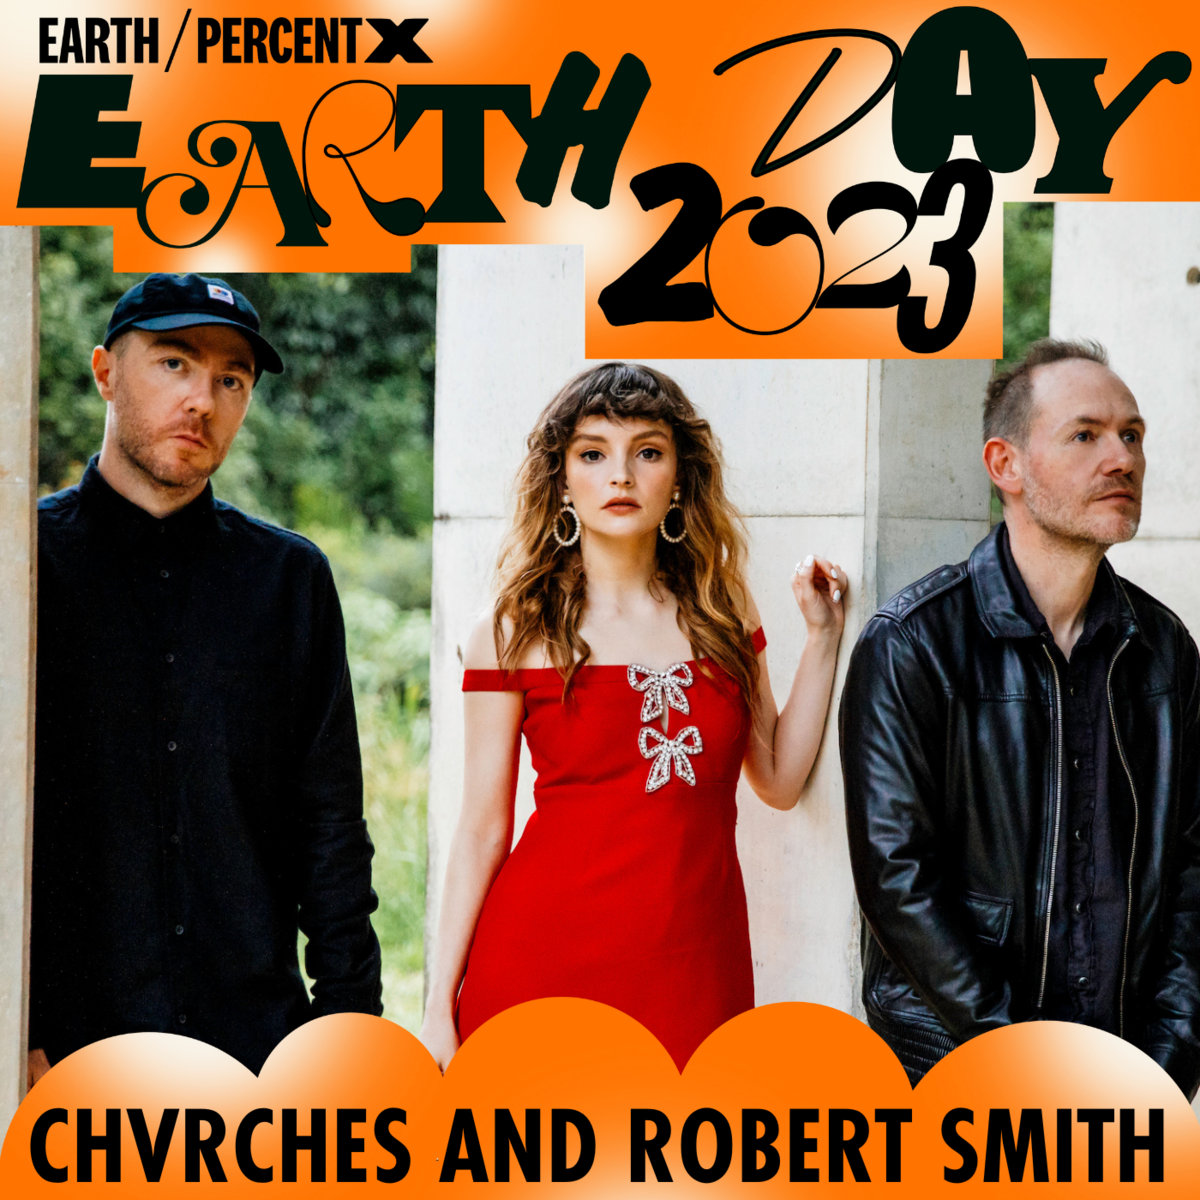 .@CHVRCHES has donated an exclusive unreleased live version of #HowNotToDrown with @RobertSmith for the @earthpercentorg x Earth Day '23 Compilation Album💚

Buy it now on @Bandcamp: earthpercent.bandcamp.com/album/earthper…

#CHVRCHES #EarthPercentEarthDay #LaurenMayberry #RobertSmith #TheCure